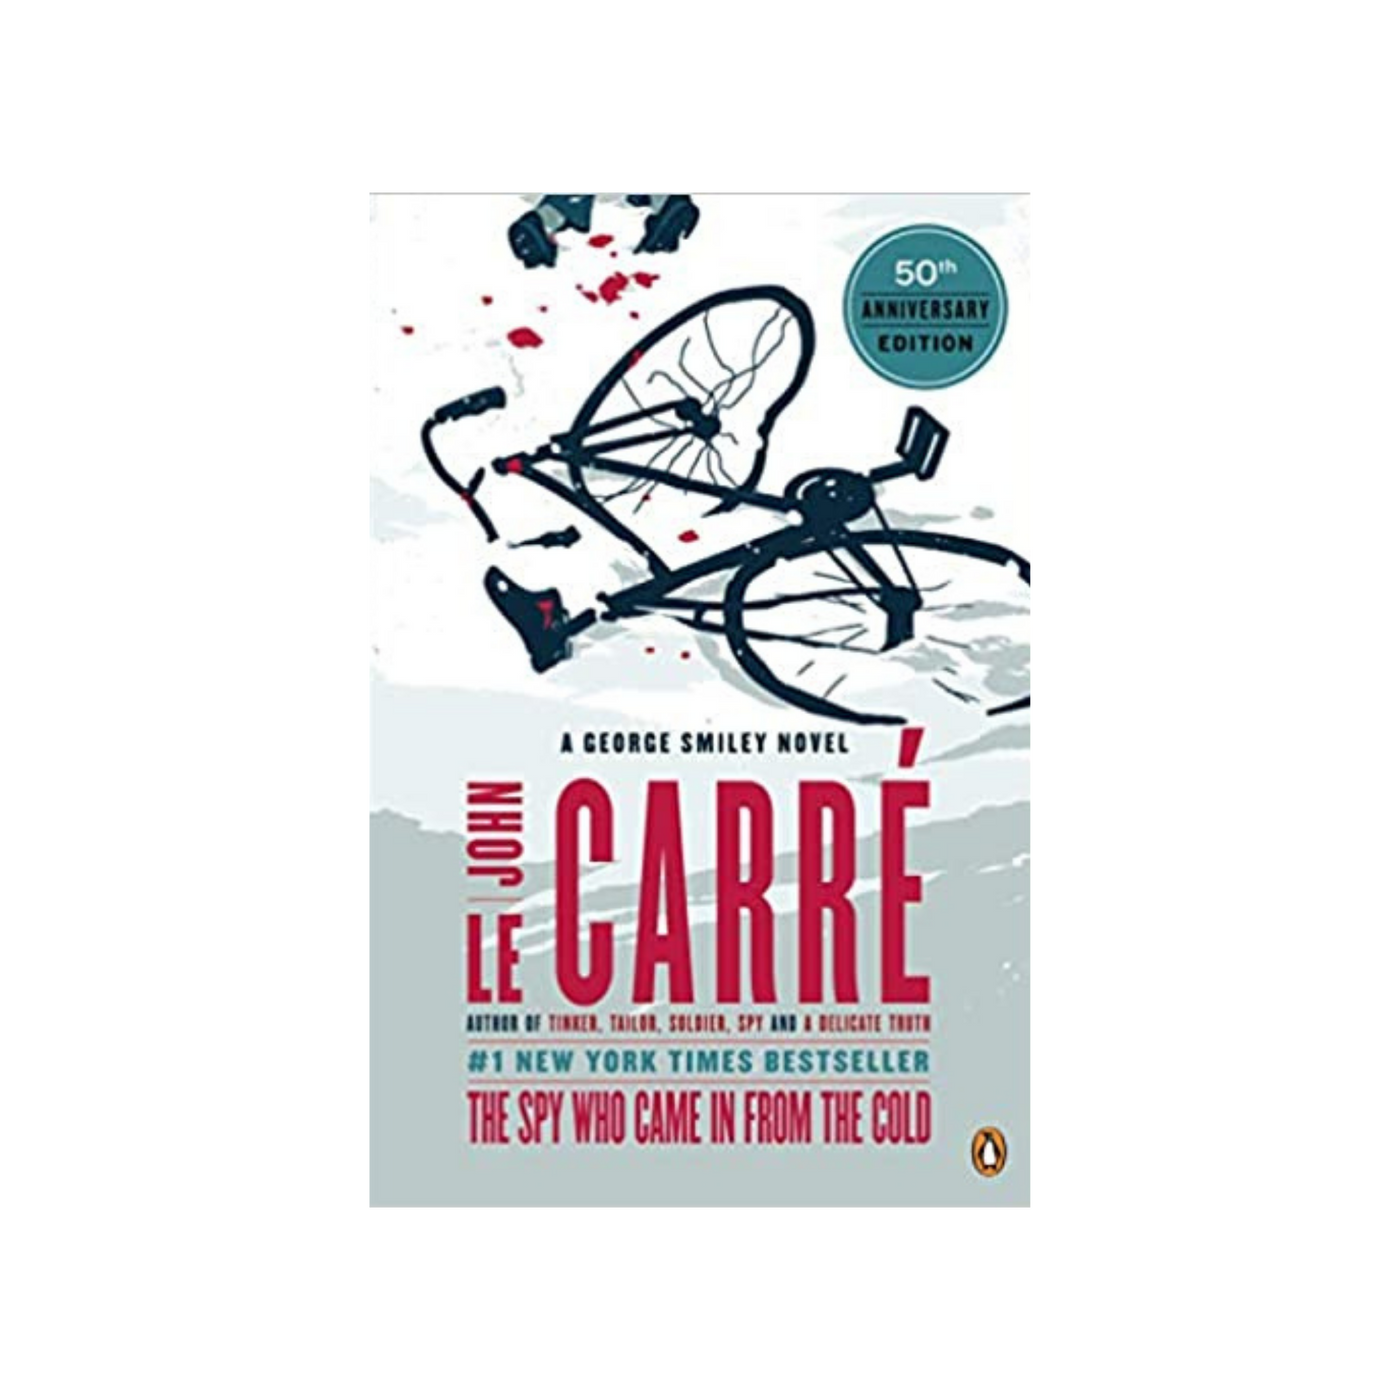 The Spy Who Came In From The Cold by John le Carré